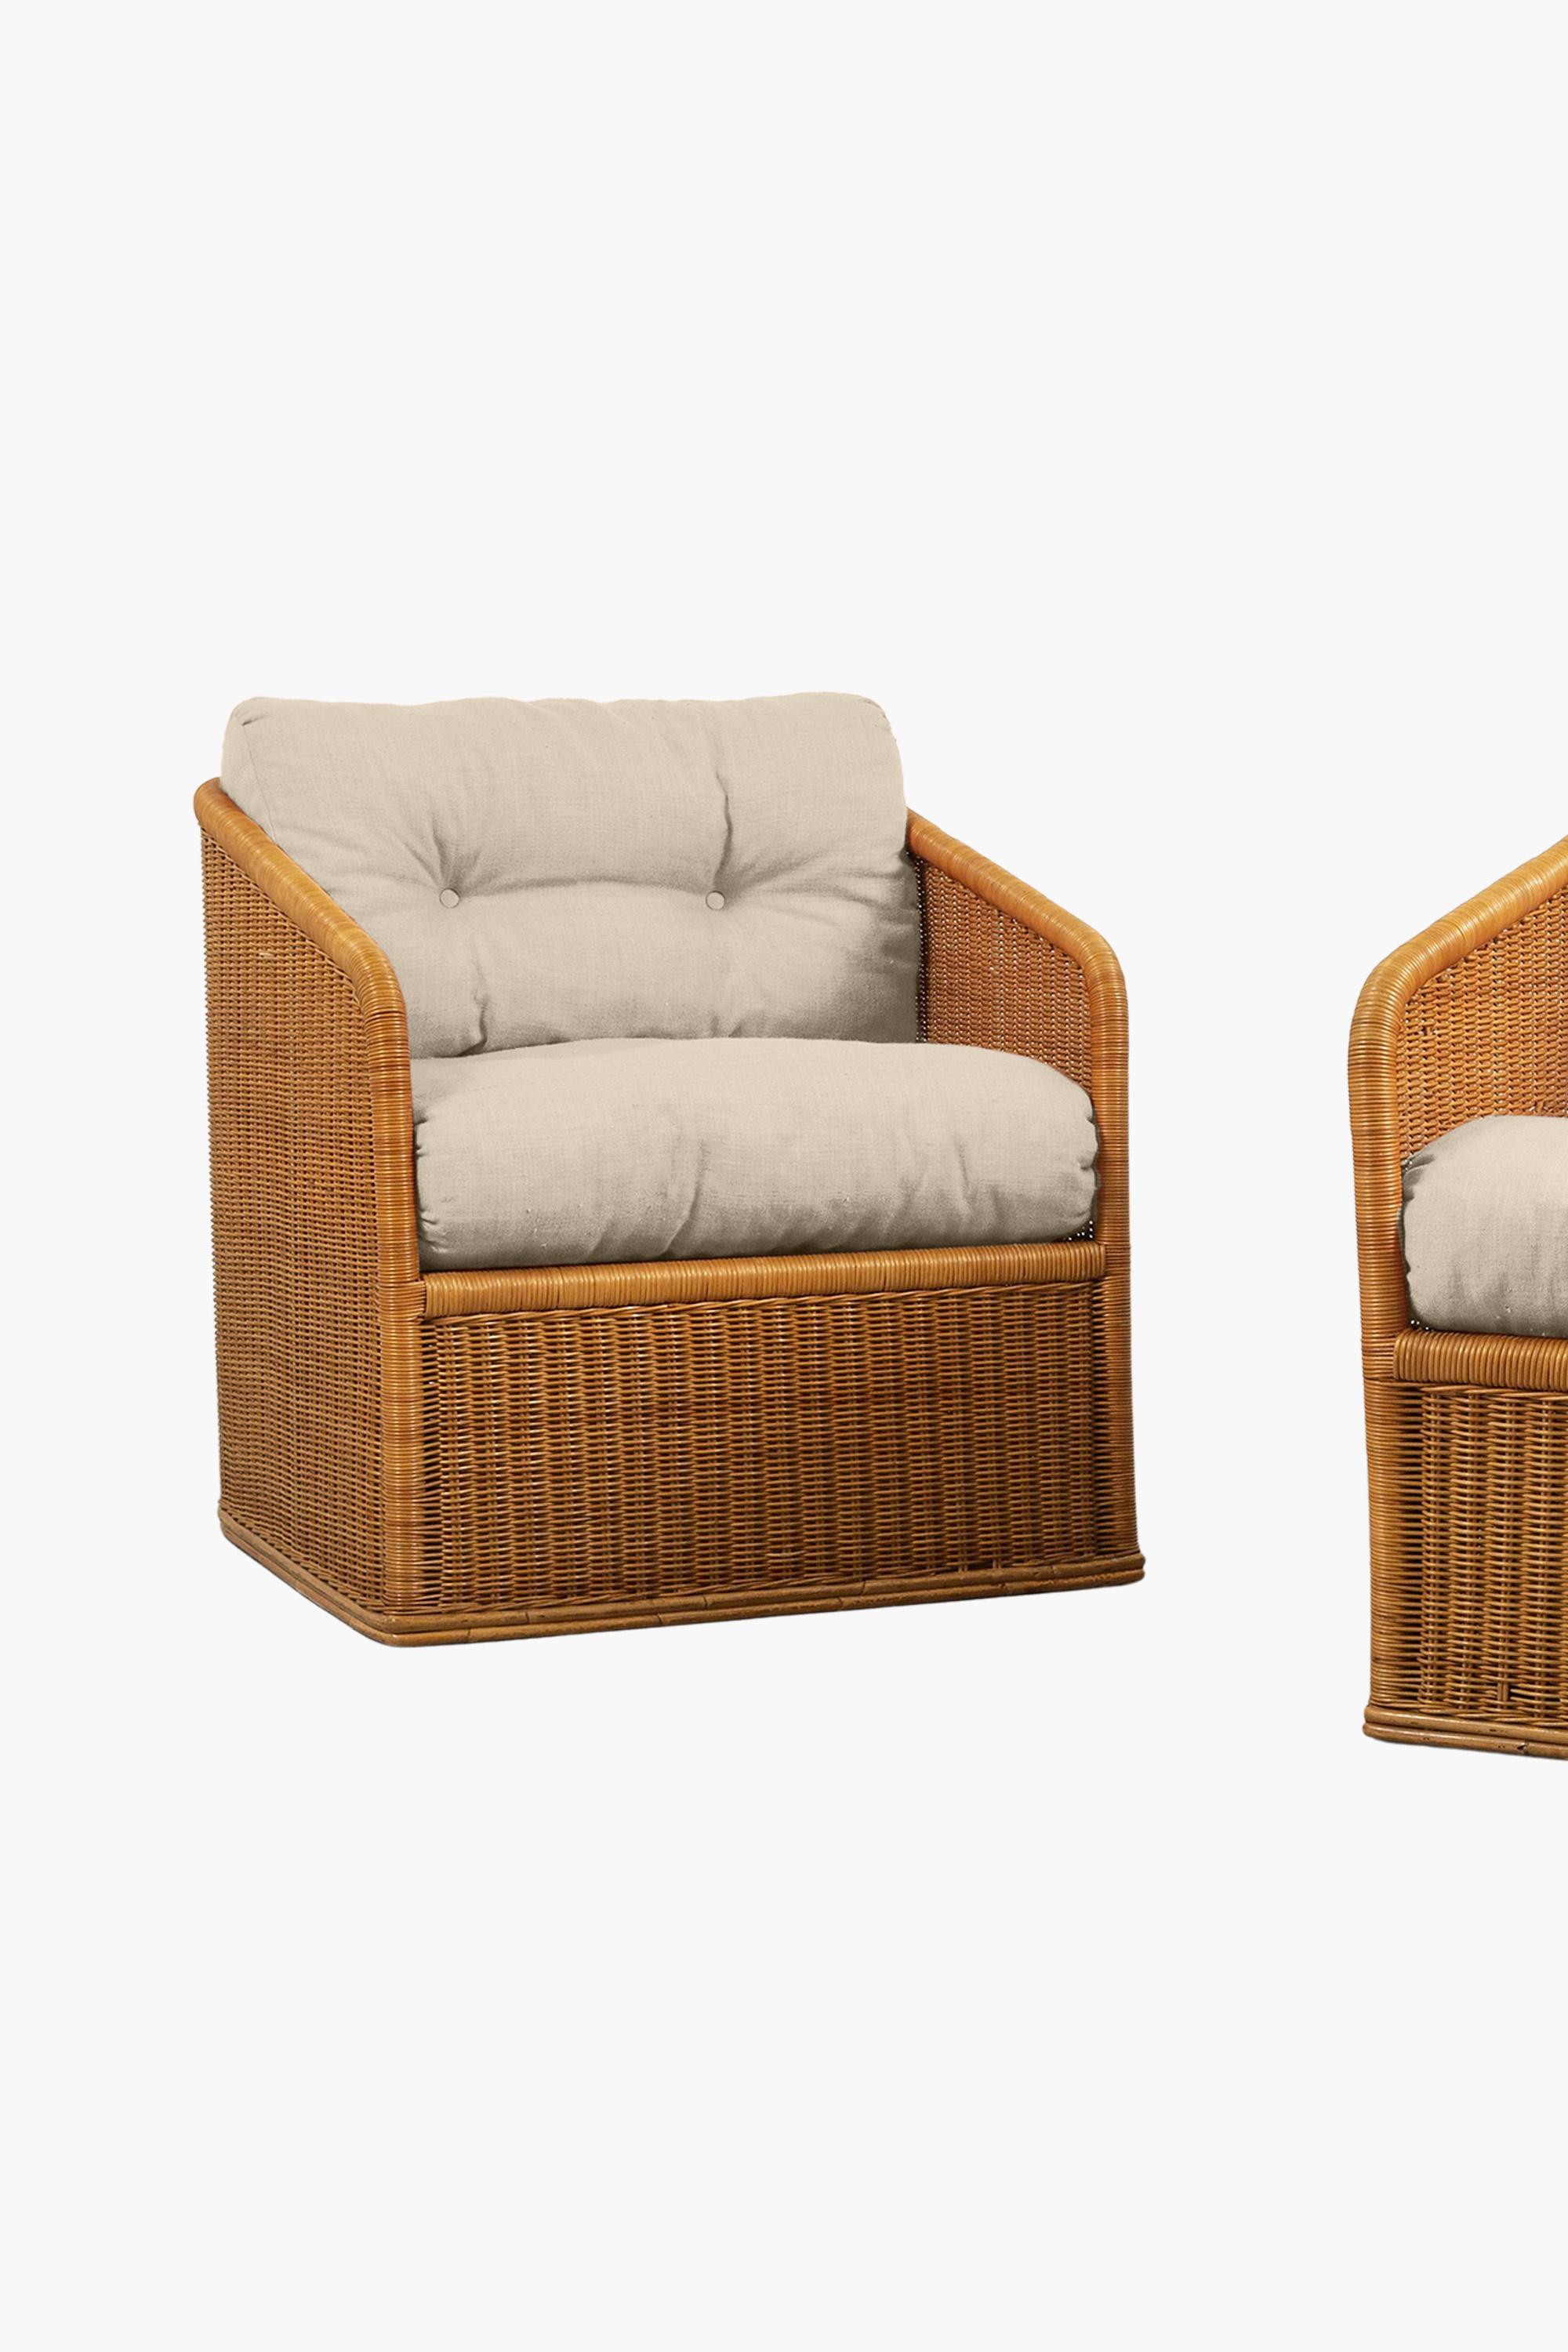 A stylish pair of rattan armchairs. Made in Italy c. 1970.

In excellent condition. Price includes re-covering in customer's own material. 
Current upholstery is a modern peach coloured linen. The cushion images here have been re-coloured to show an